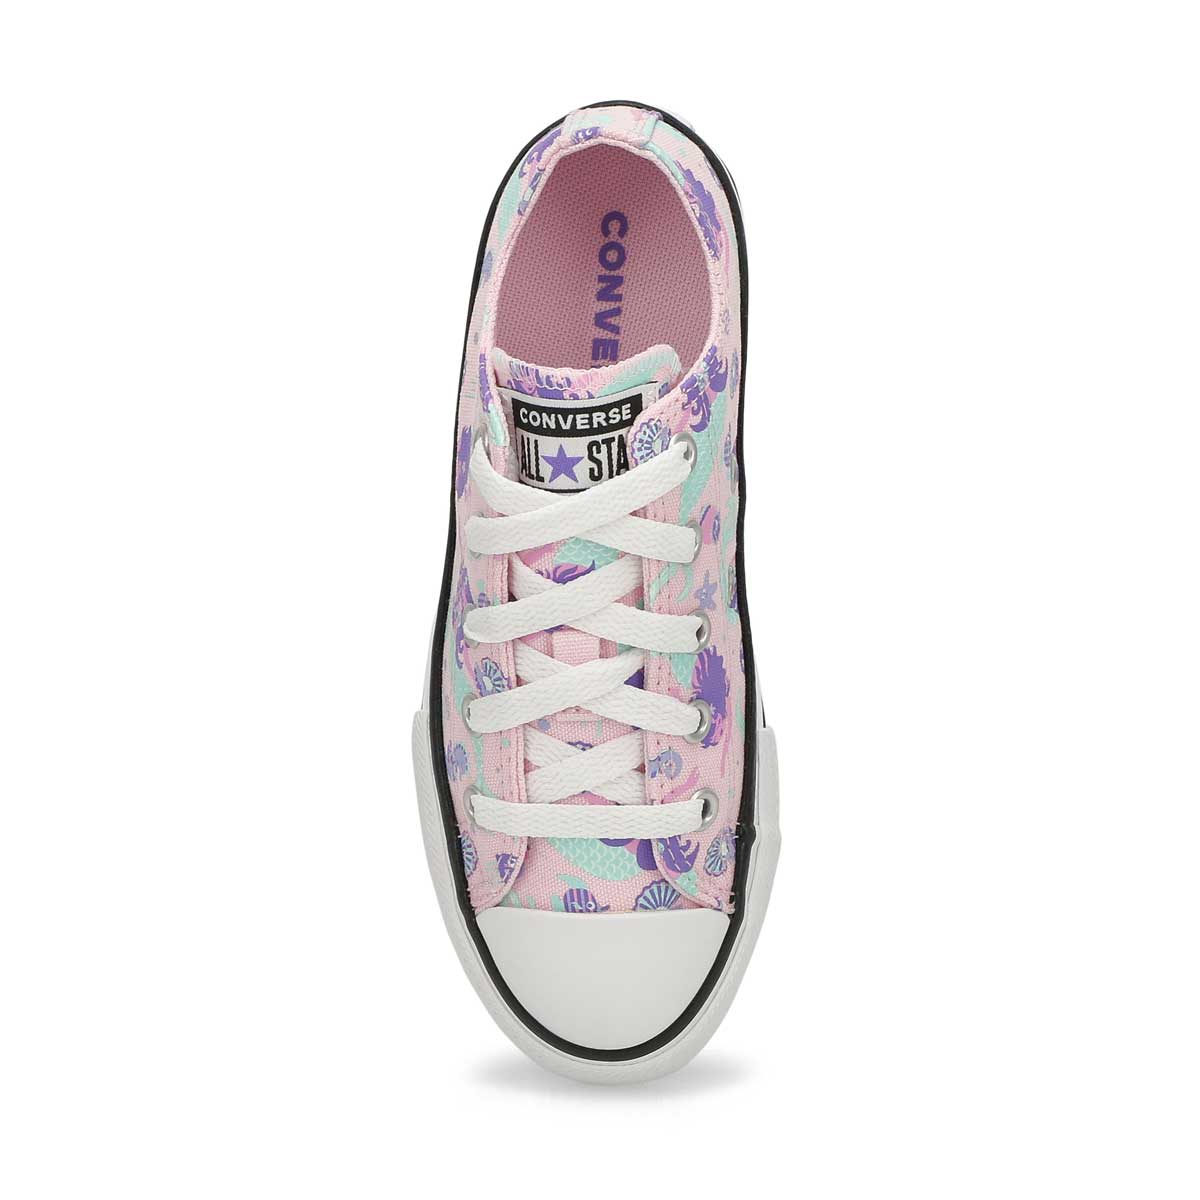 Girls' CT All Star Under The Sea Sneaker